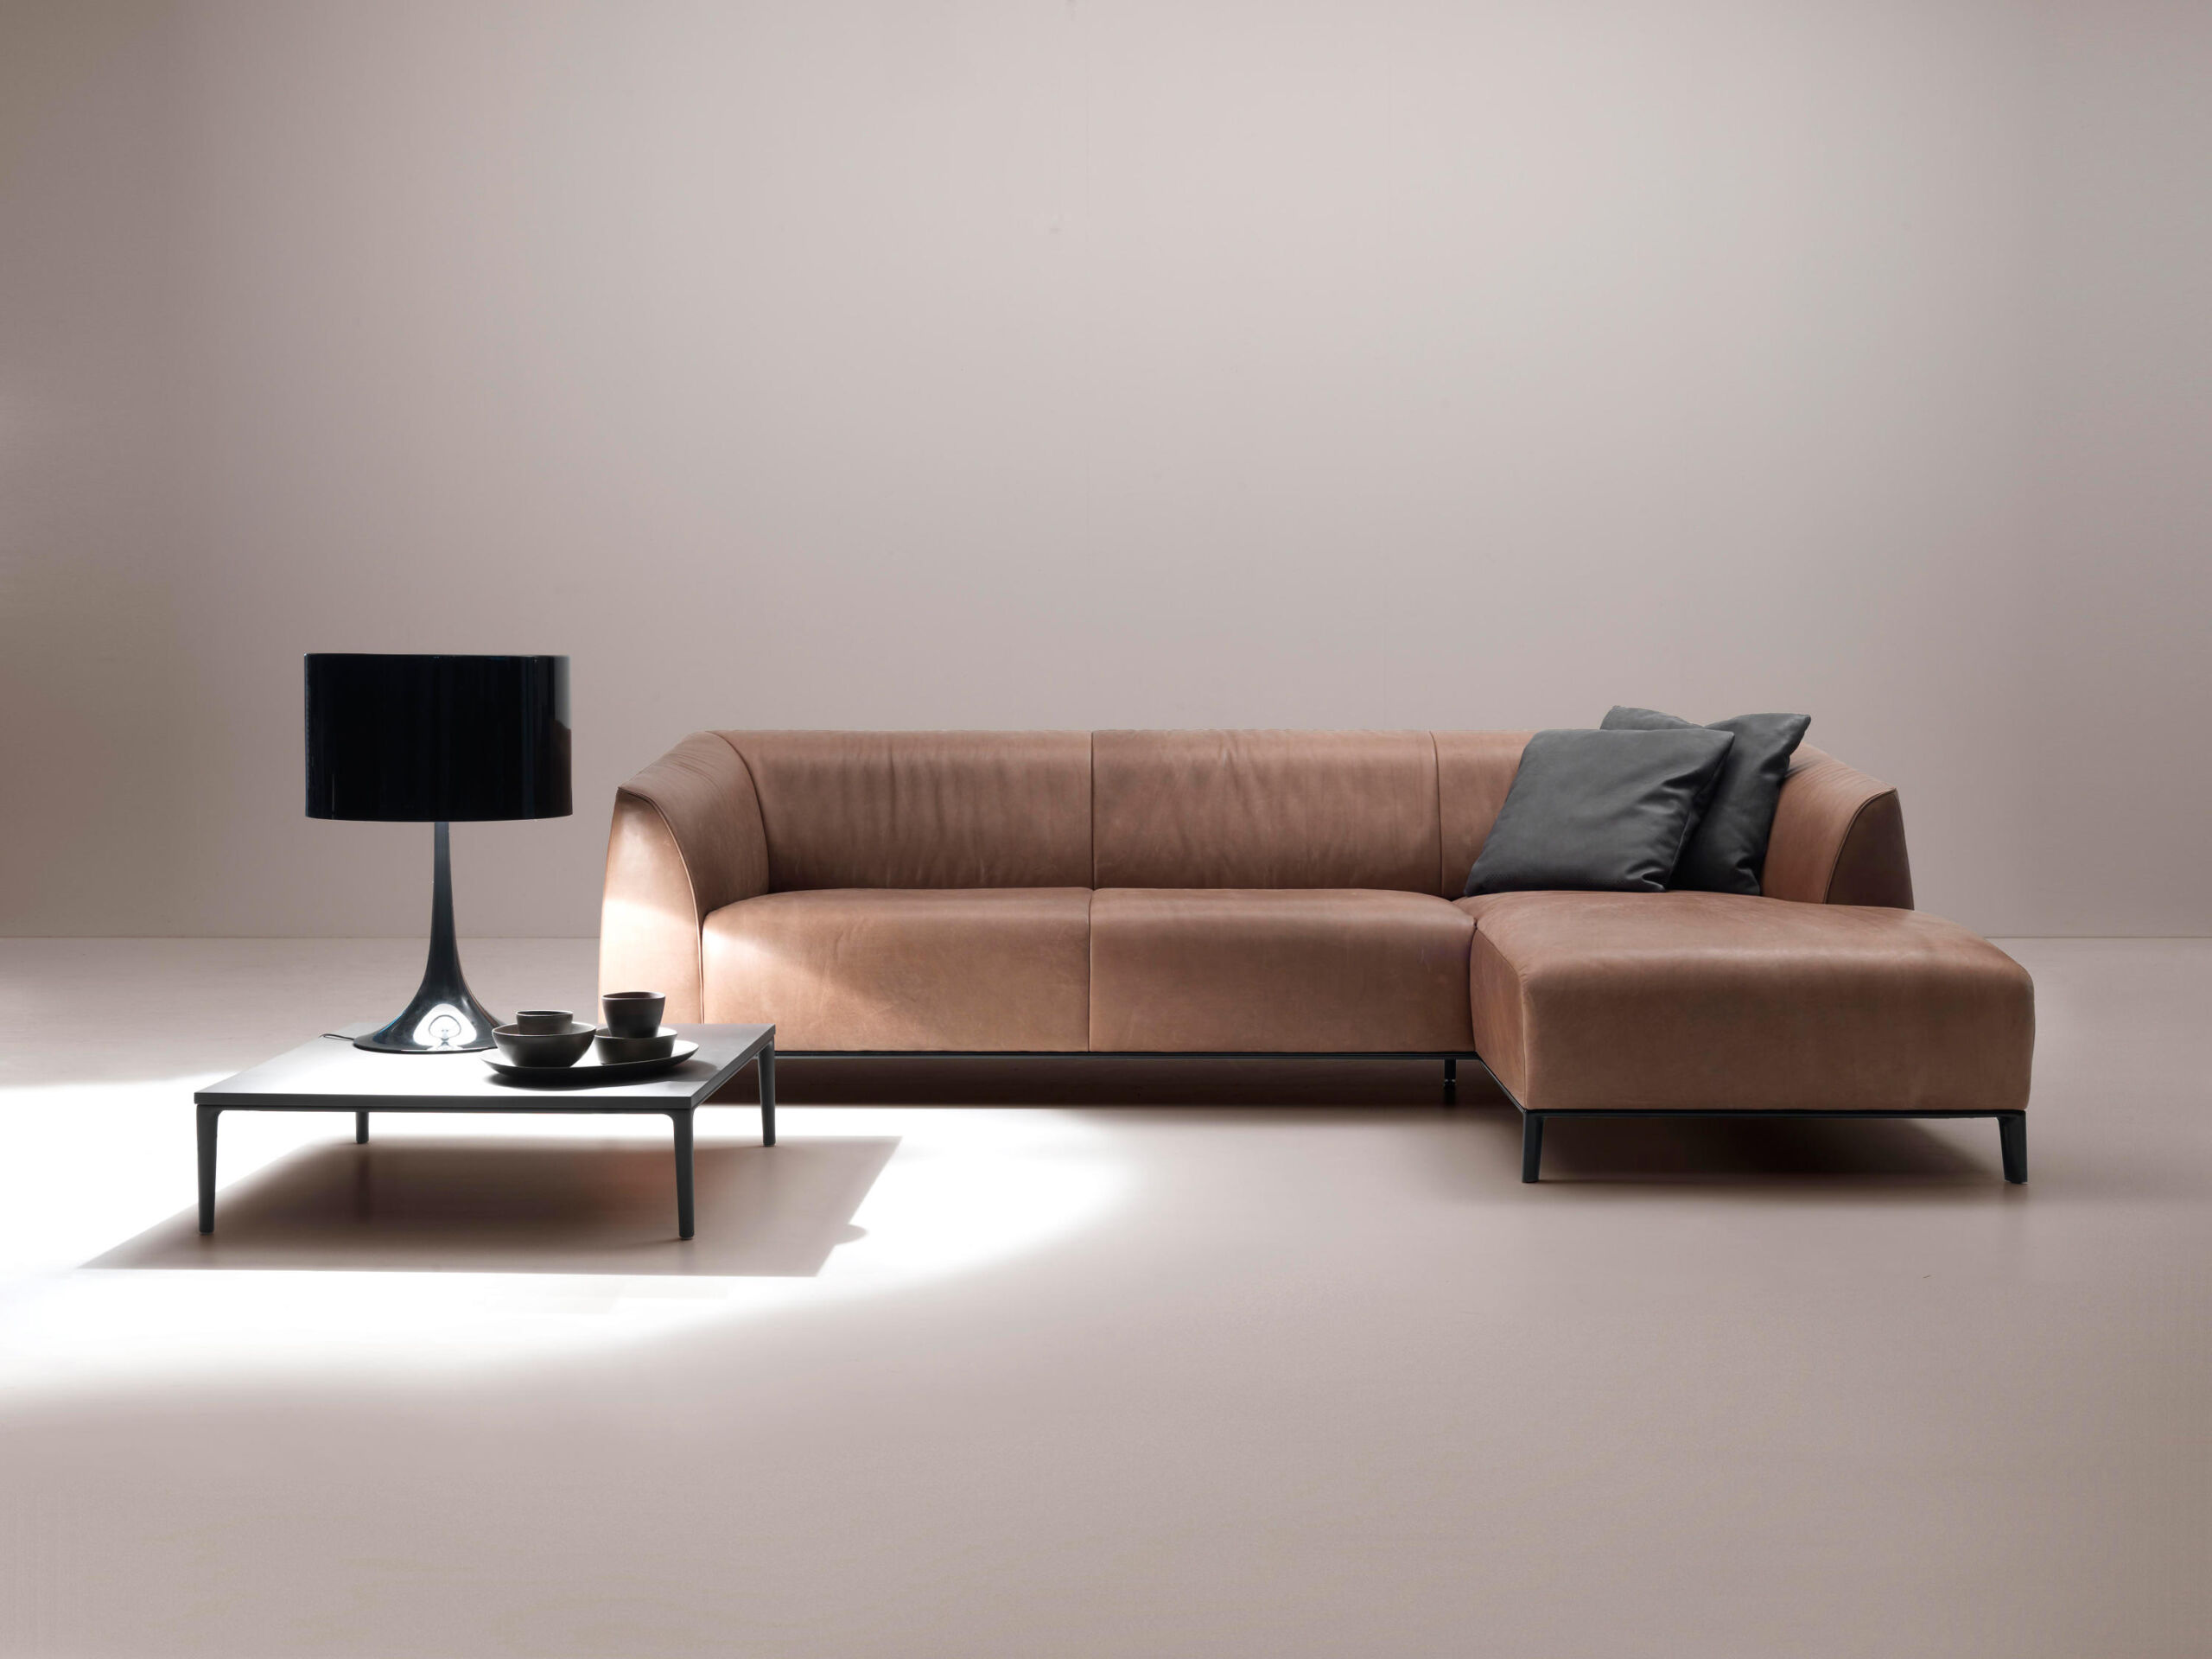 de Sede Premium Leather Products, Sofa, Chair, Armchair, Table, and more